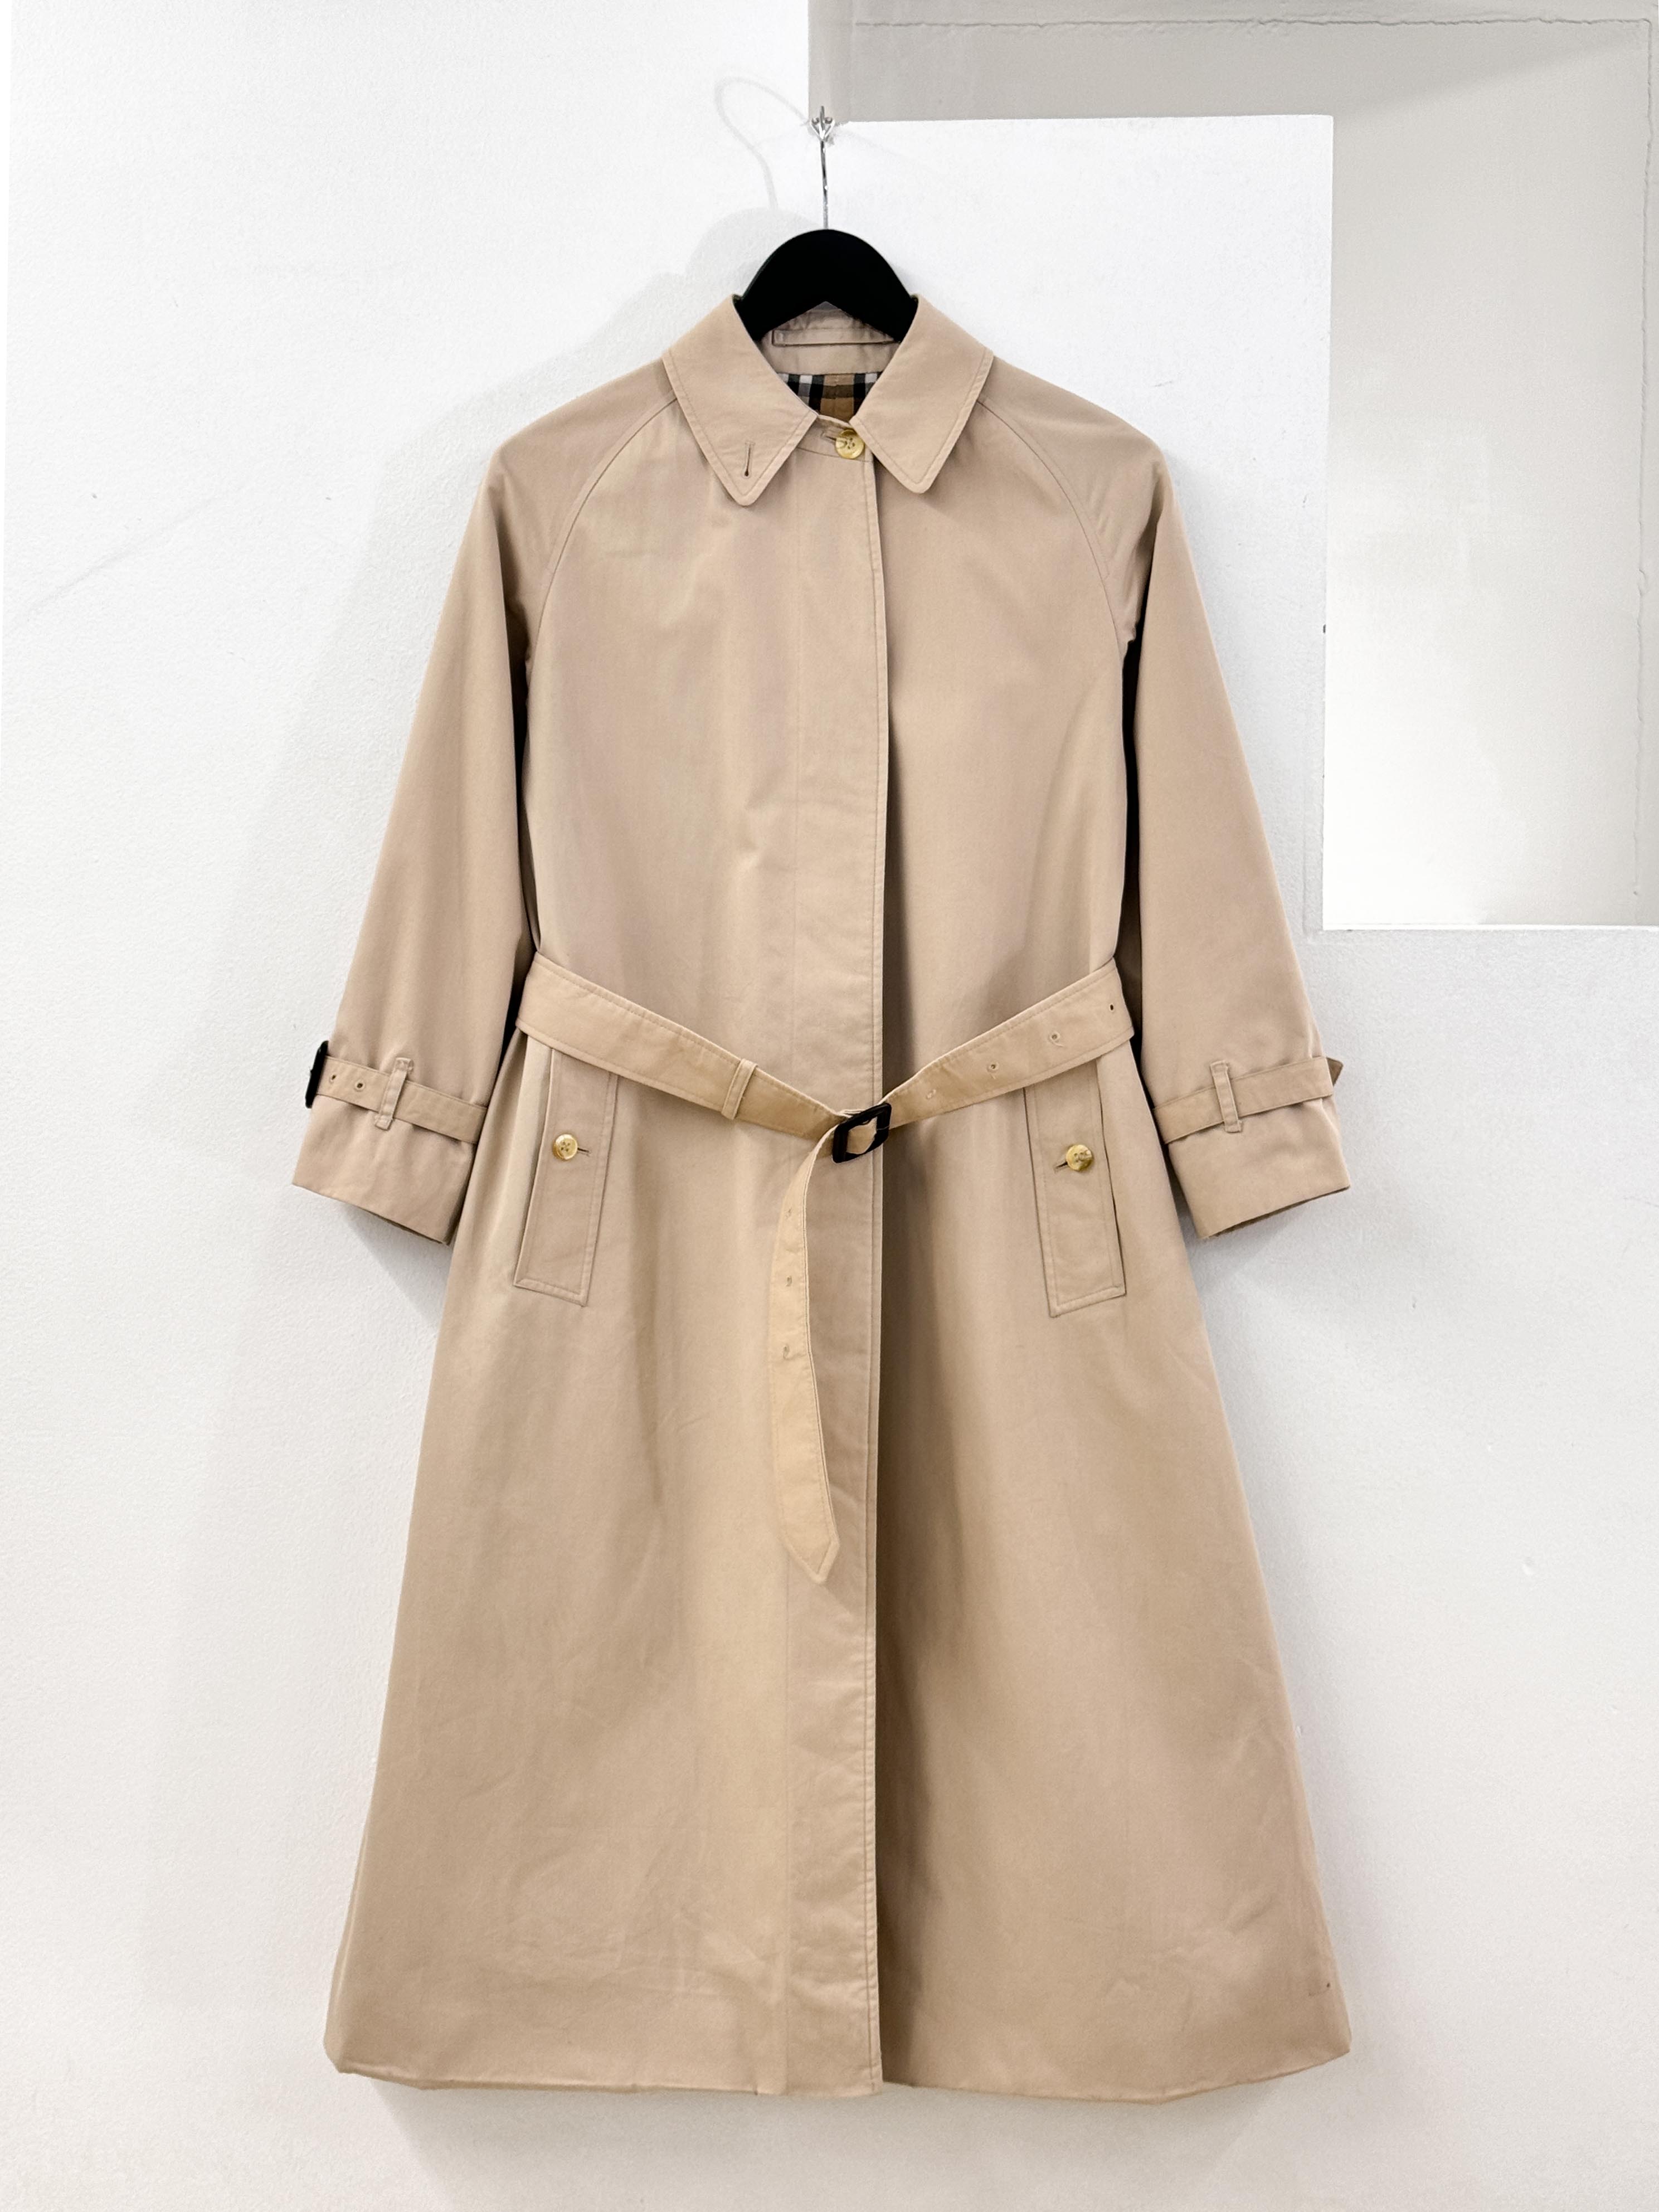 Burberry trench coat, Scotland made